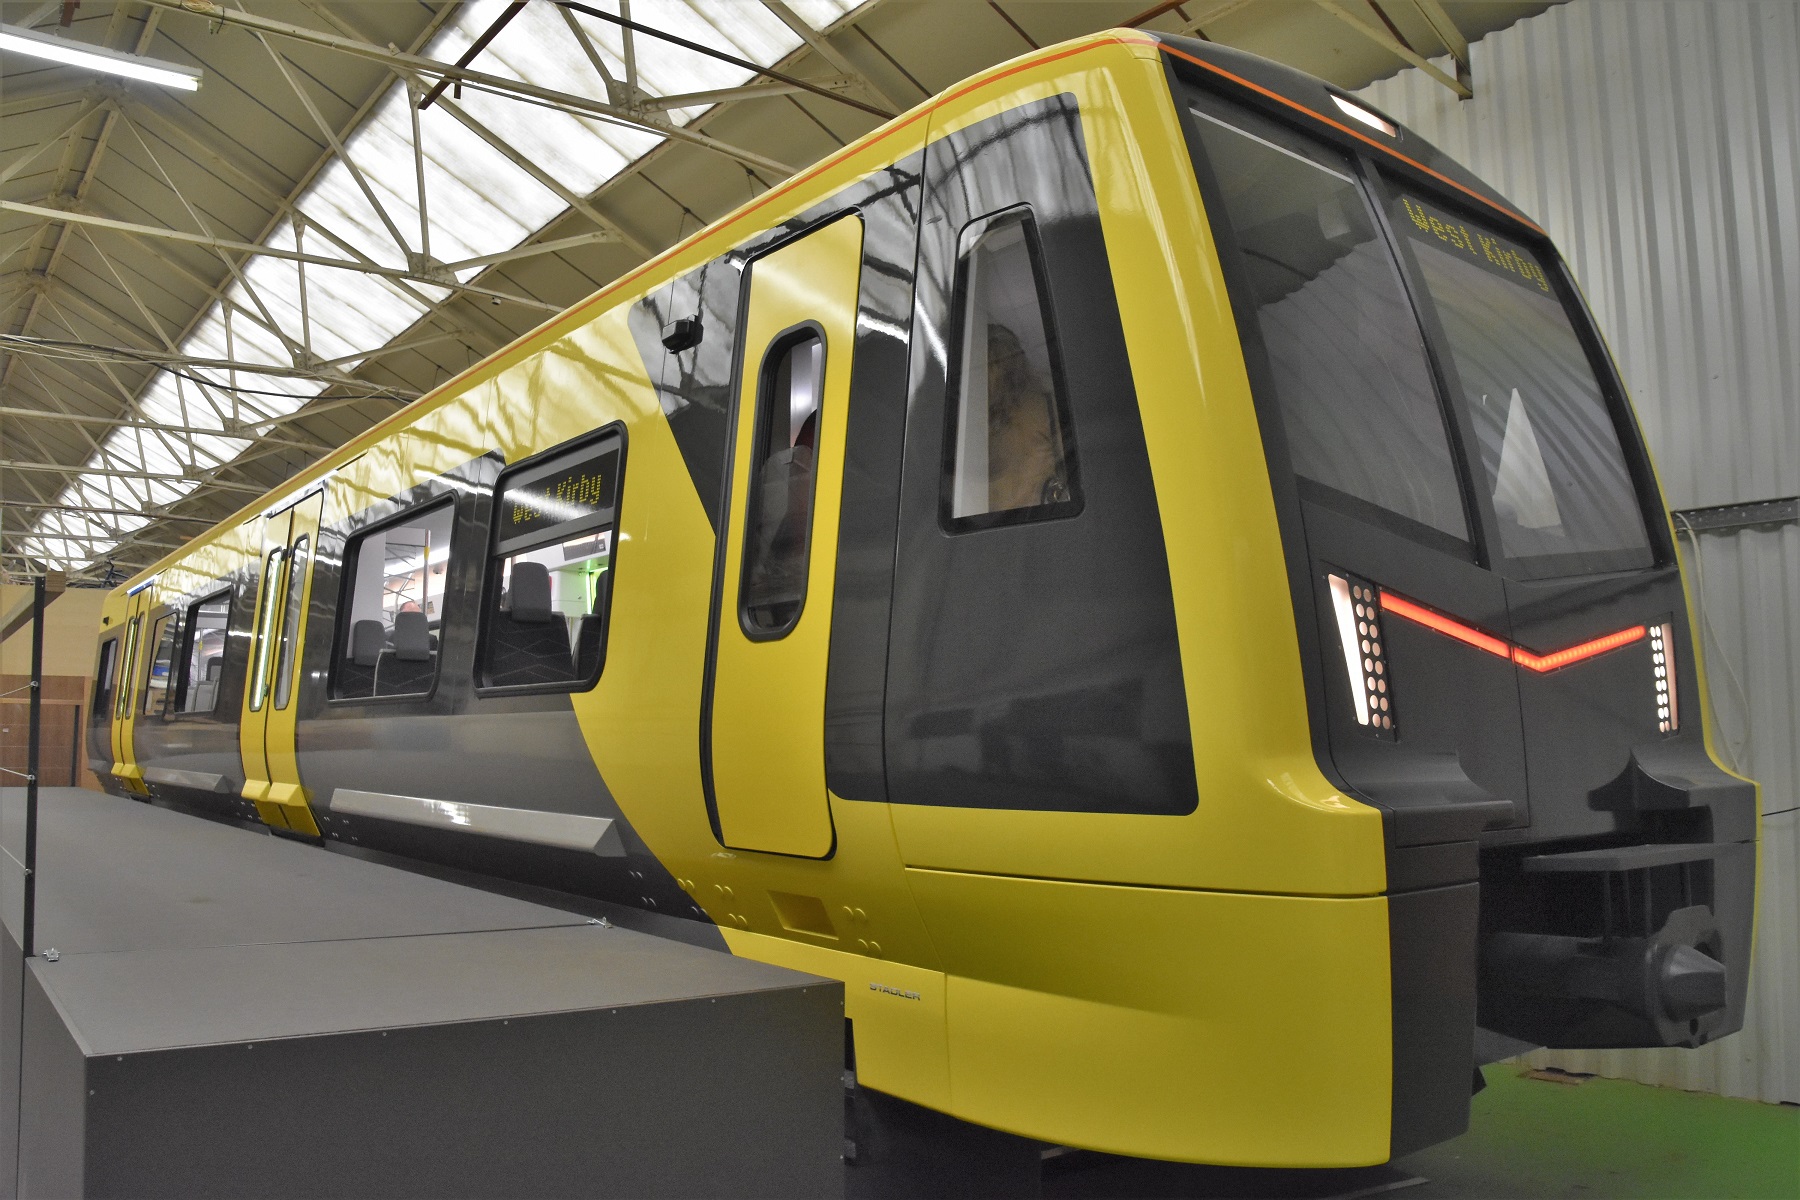 The new trains introduced next year will have step-free access